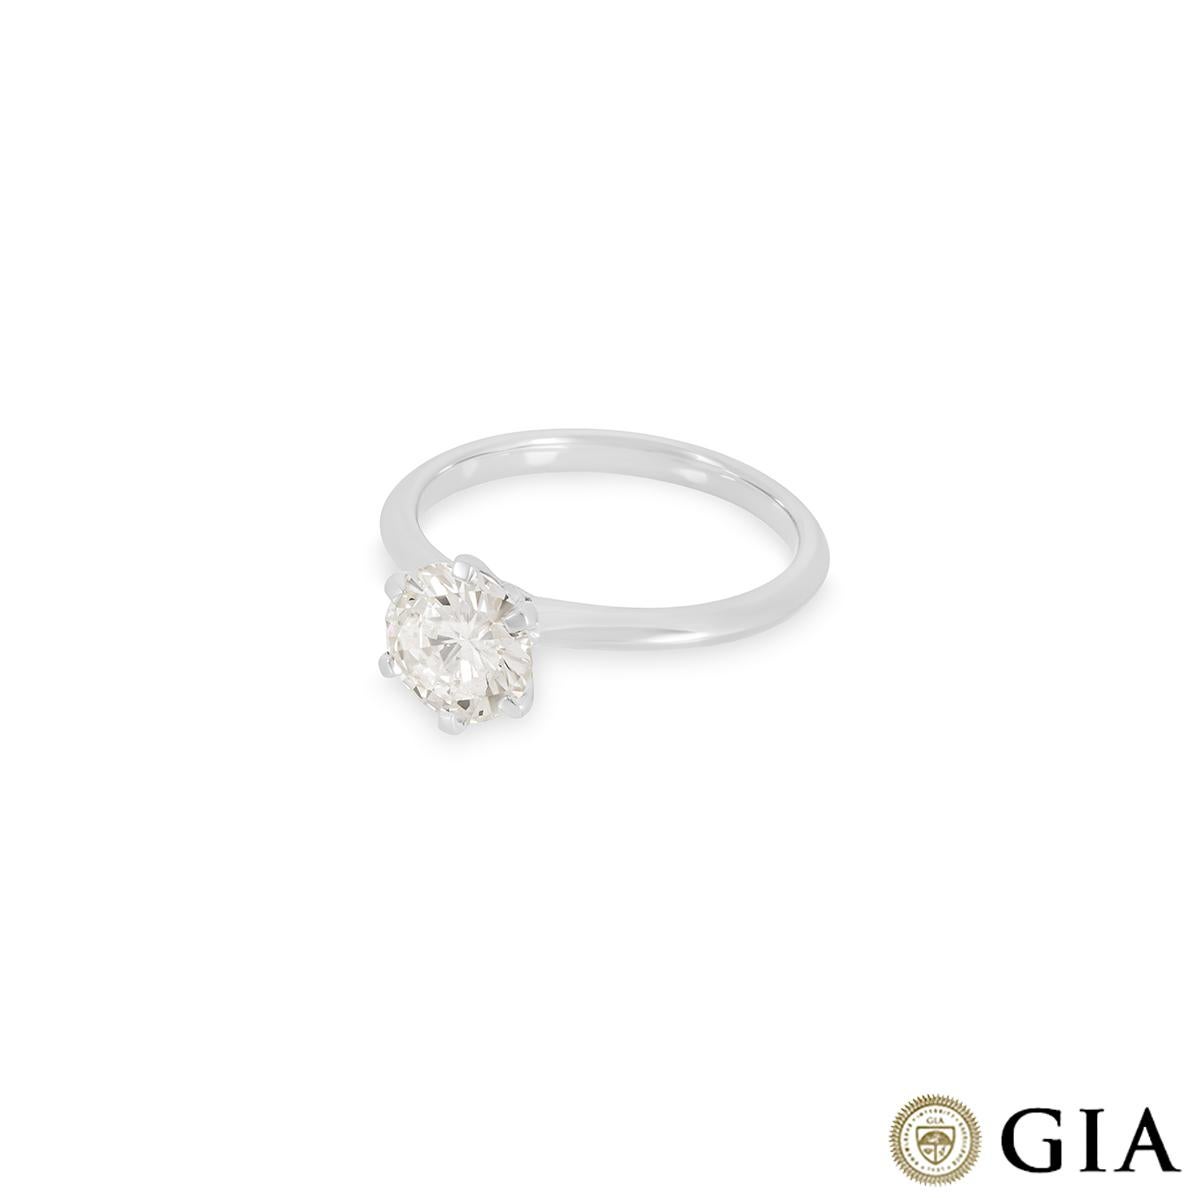 GIA Certified White Gold Round Brilliant Cut Diamond Ring 1.30ct M/VVS2 In Excellent Condition For Sale In London, GB